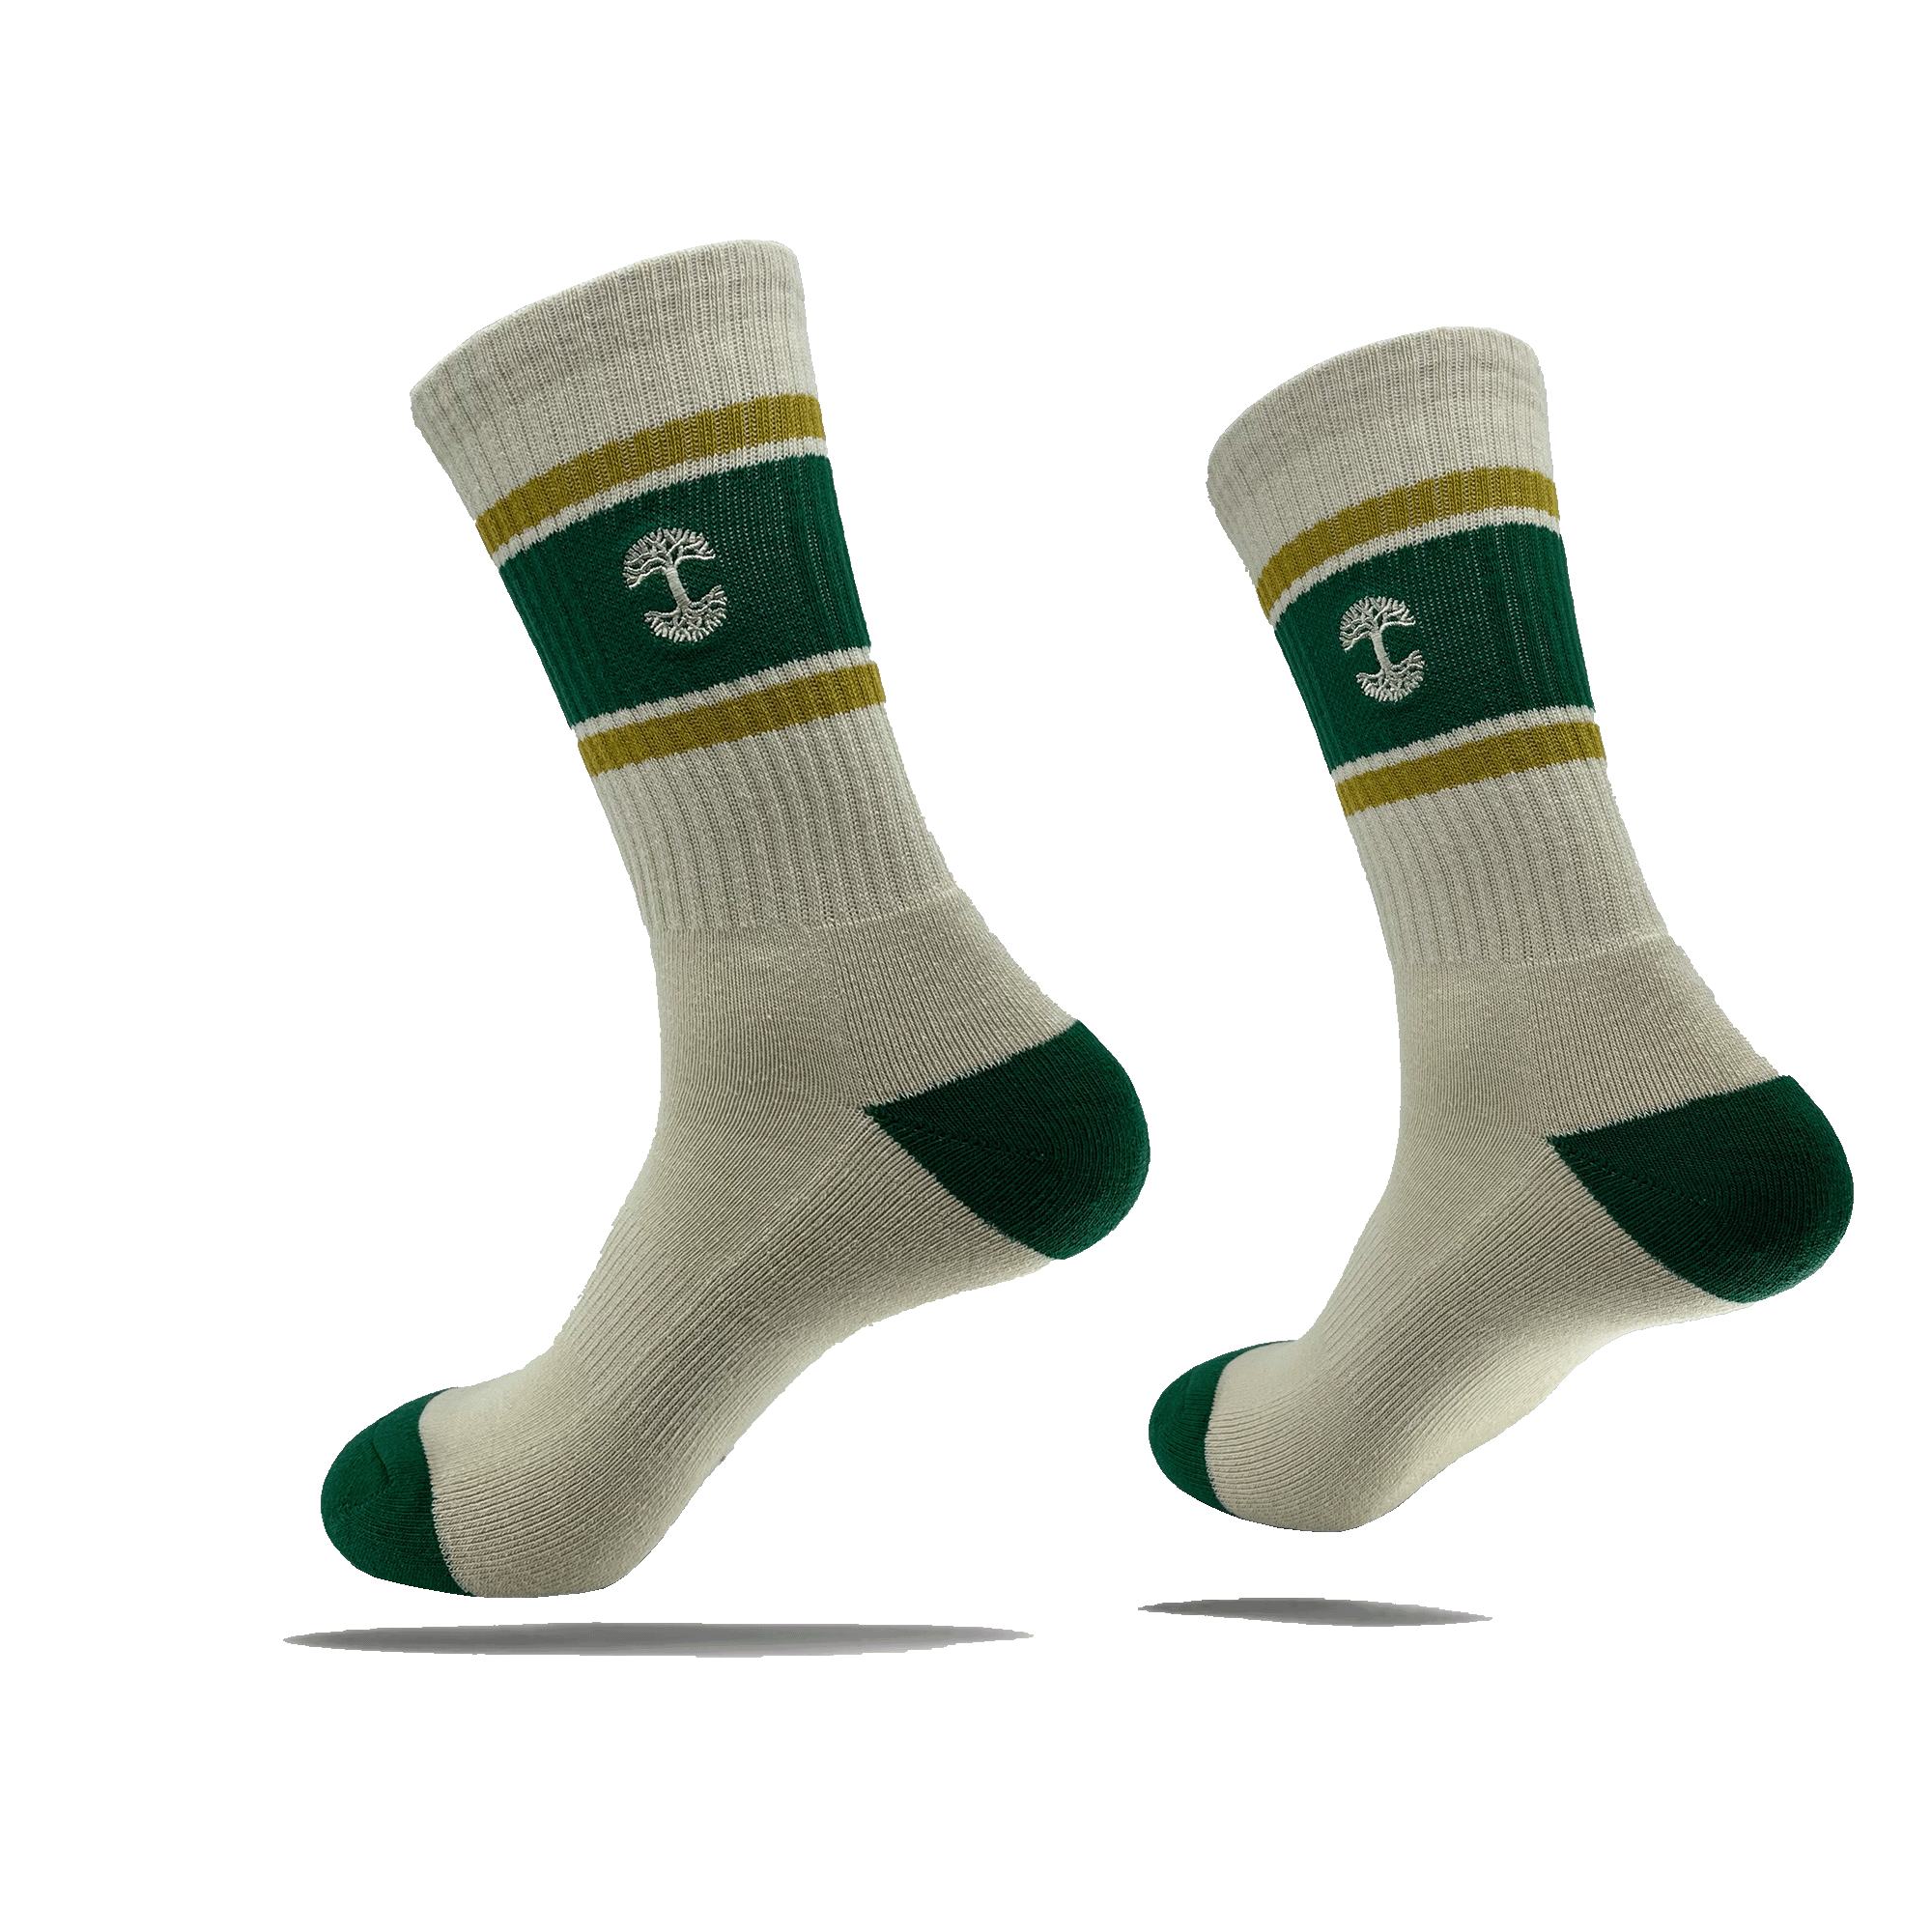 Side view of off-white crew socks with green and gold stripes and a small embroidered white Oaklandish tree logo on the calves.